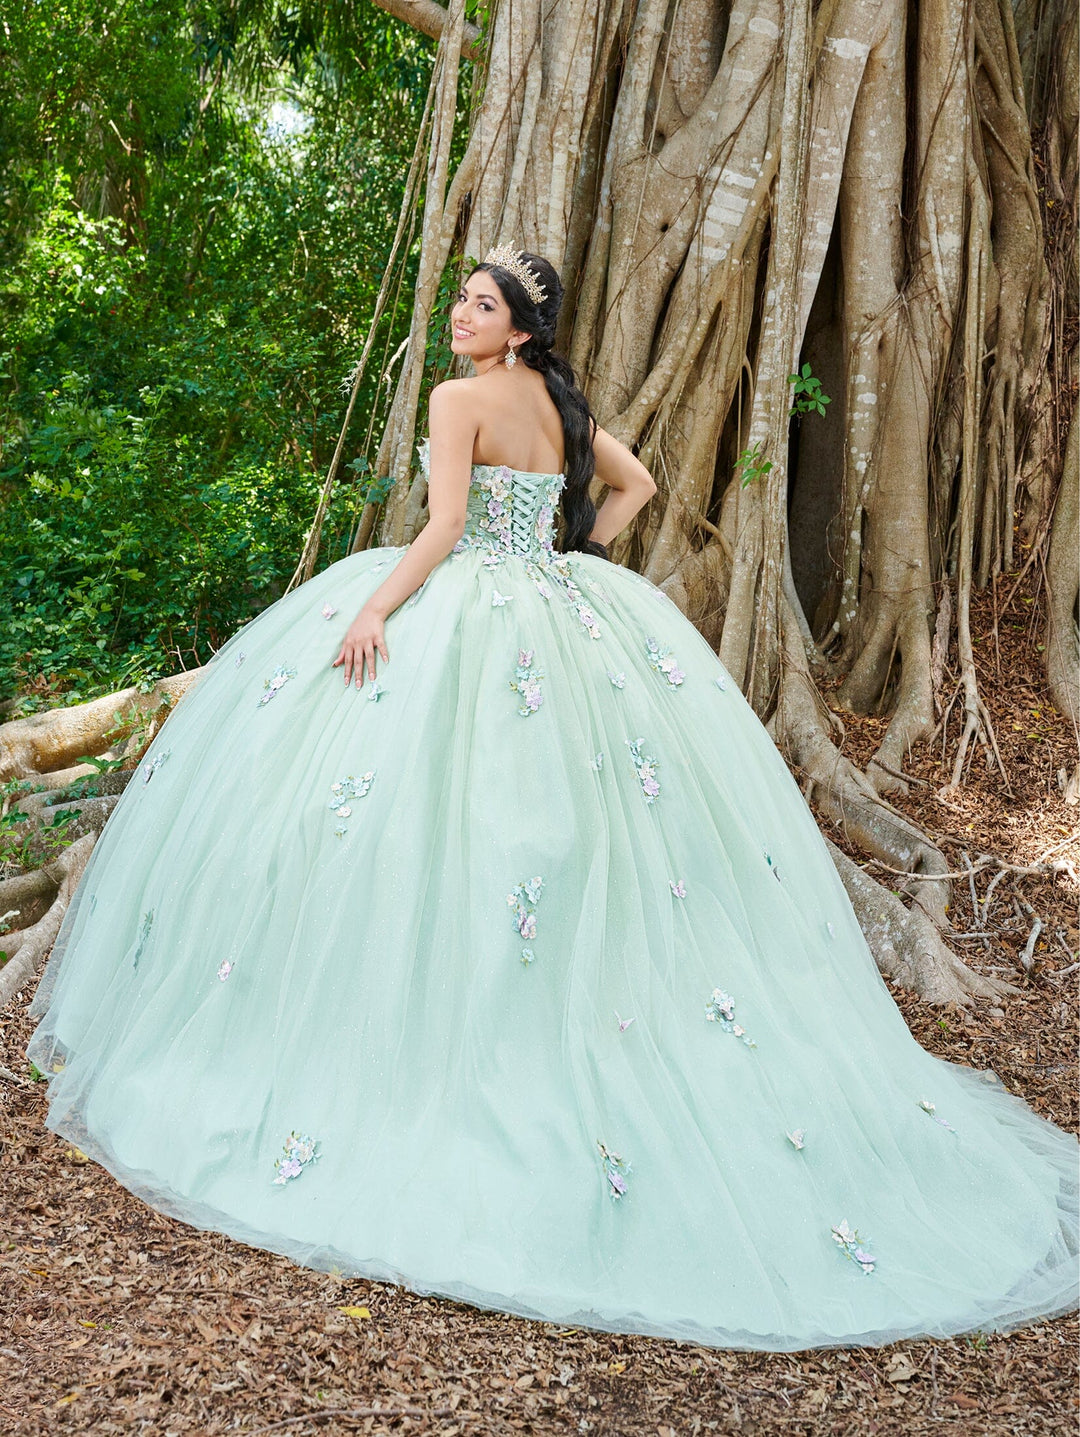 3D Floral Cape Sleeve Quinceanera Dress by Fiesta Gowns 56500